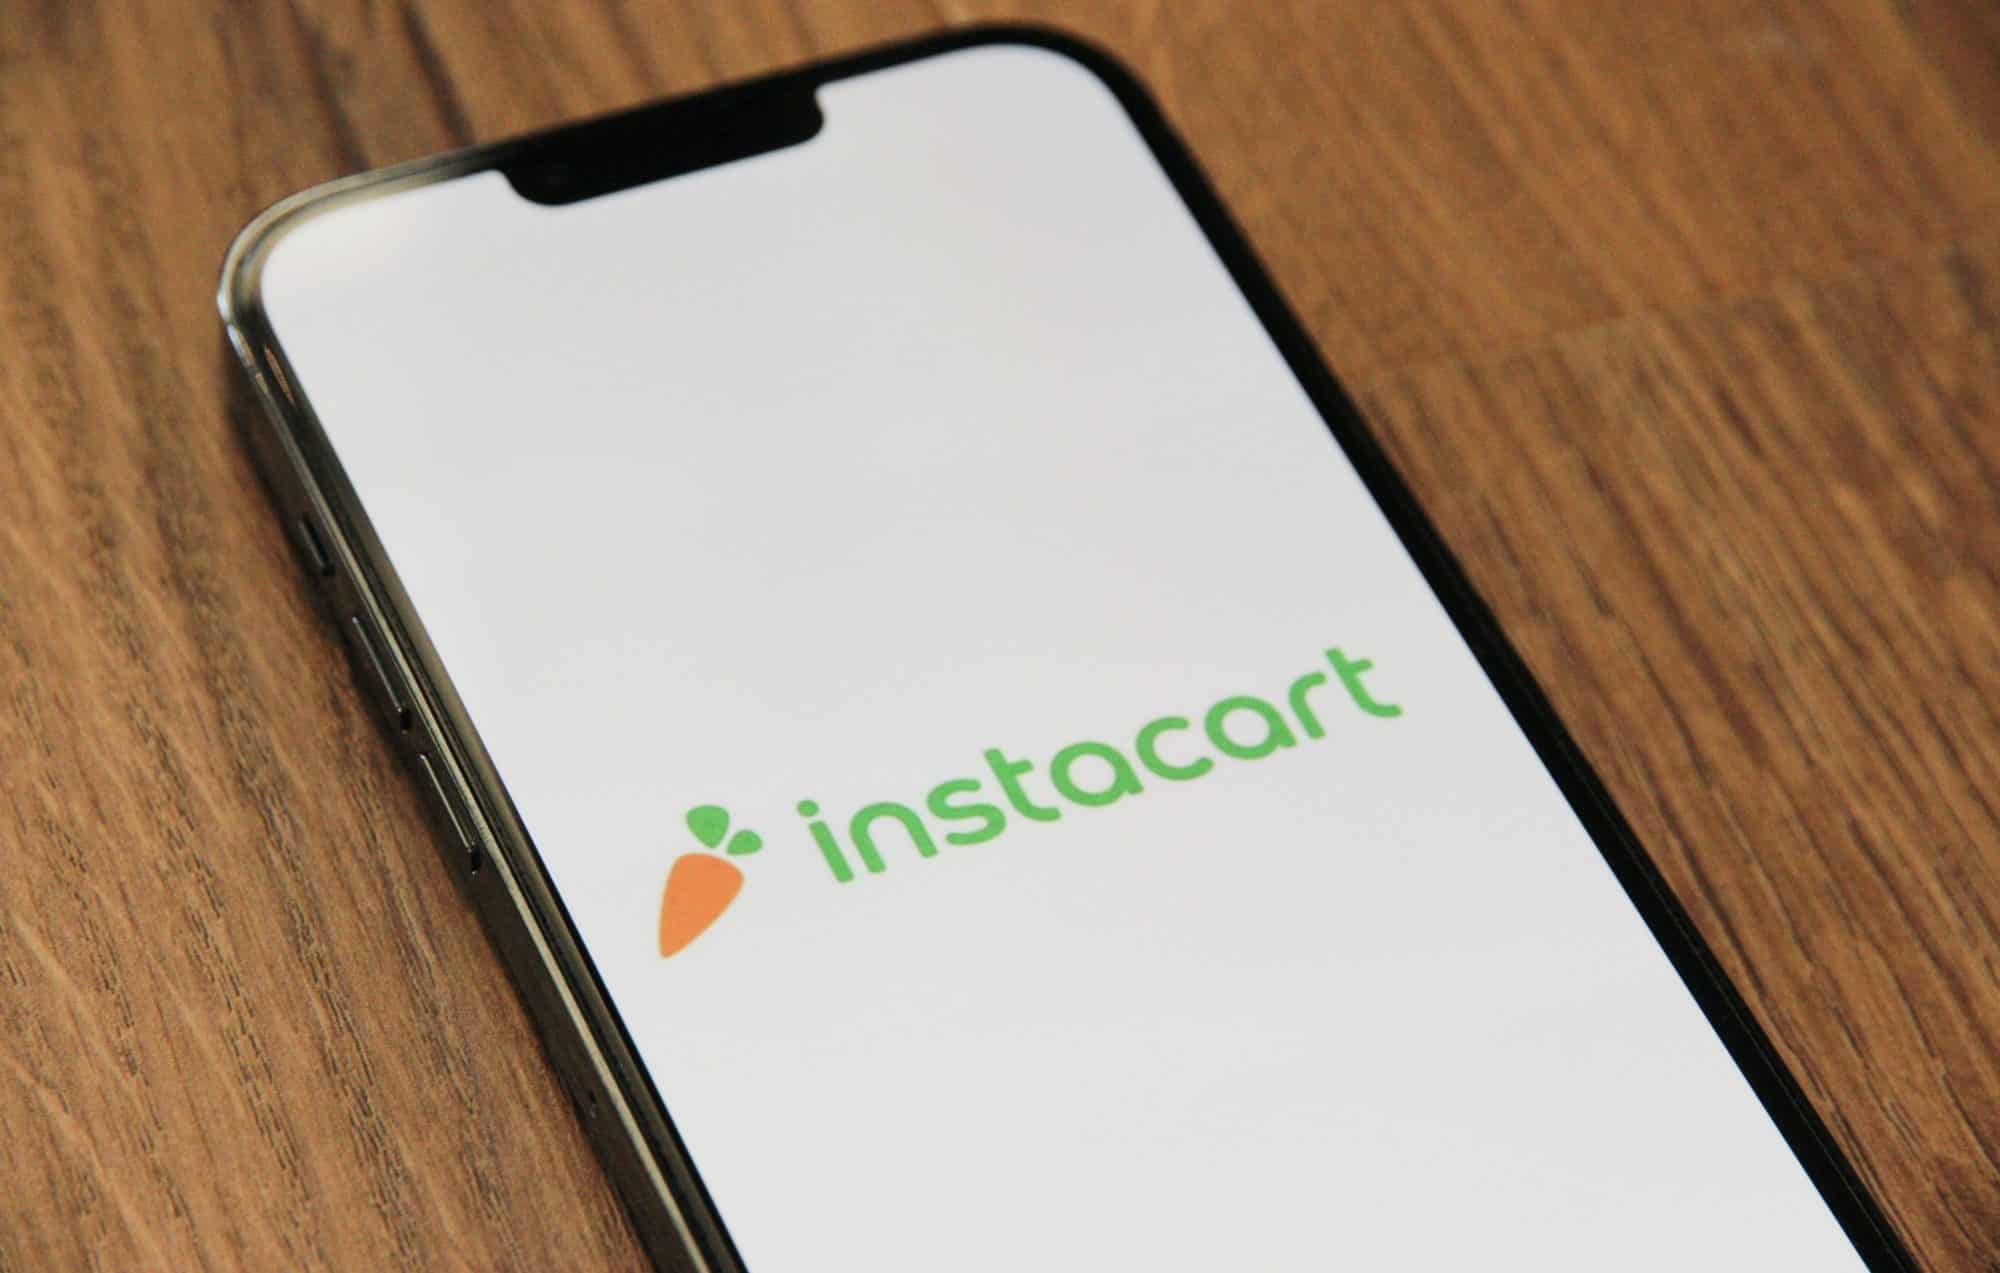 instacart felony record hub background check image of phone Instacart Background Checks: How They Work & How To Pass